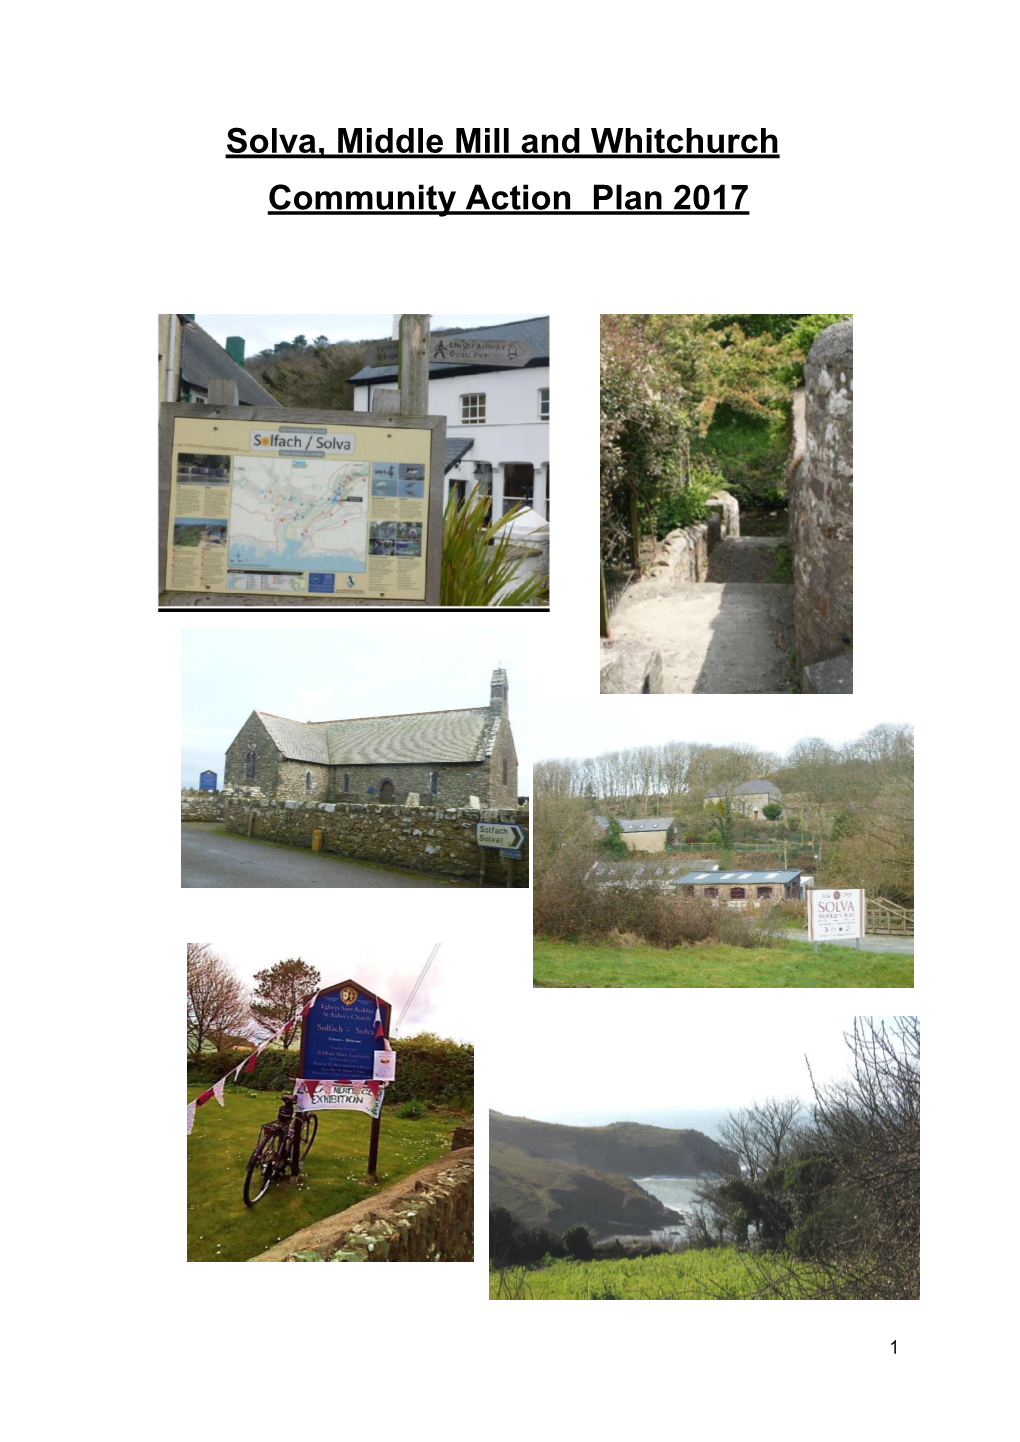 Solva, Middle Mill and Whitchurch Community Action Plan 2017